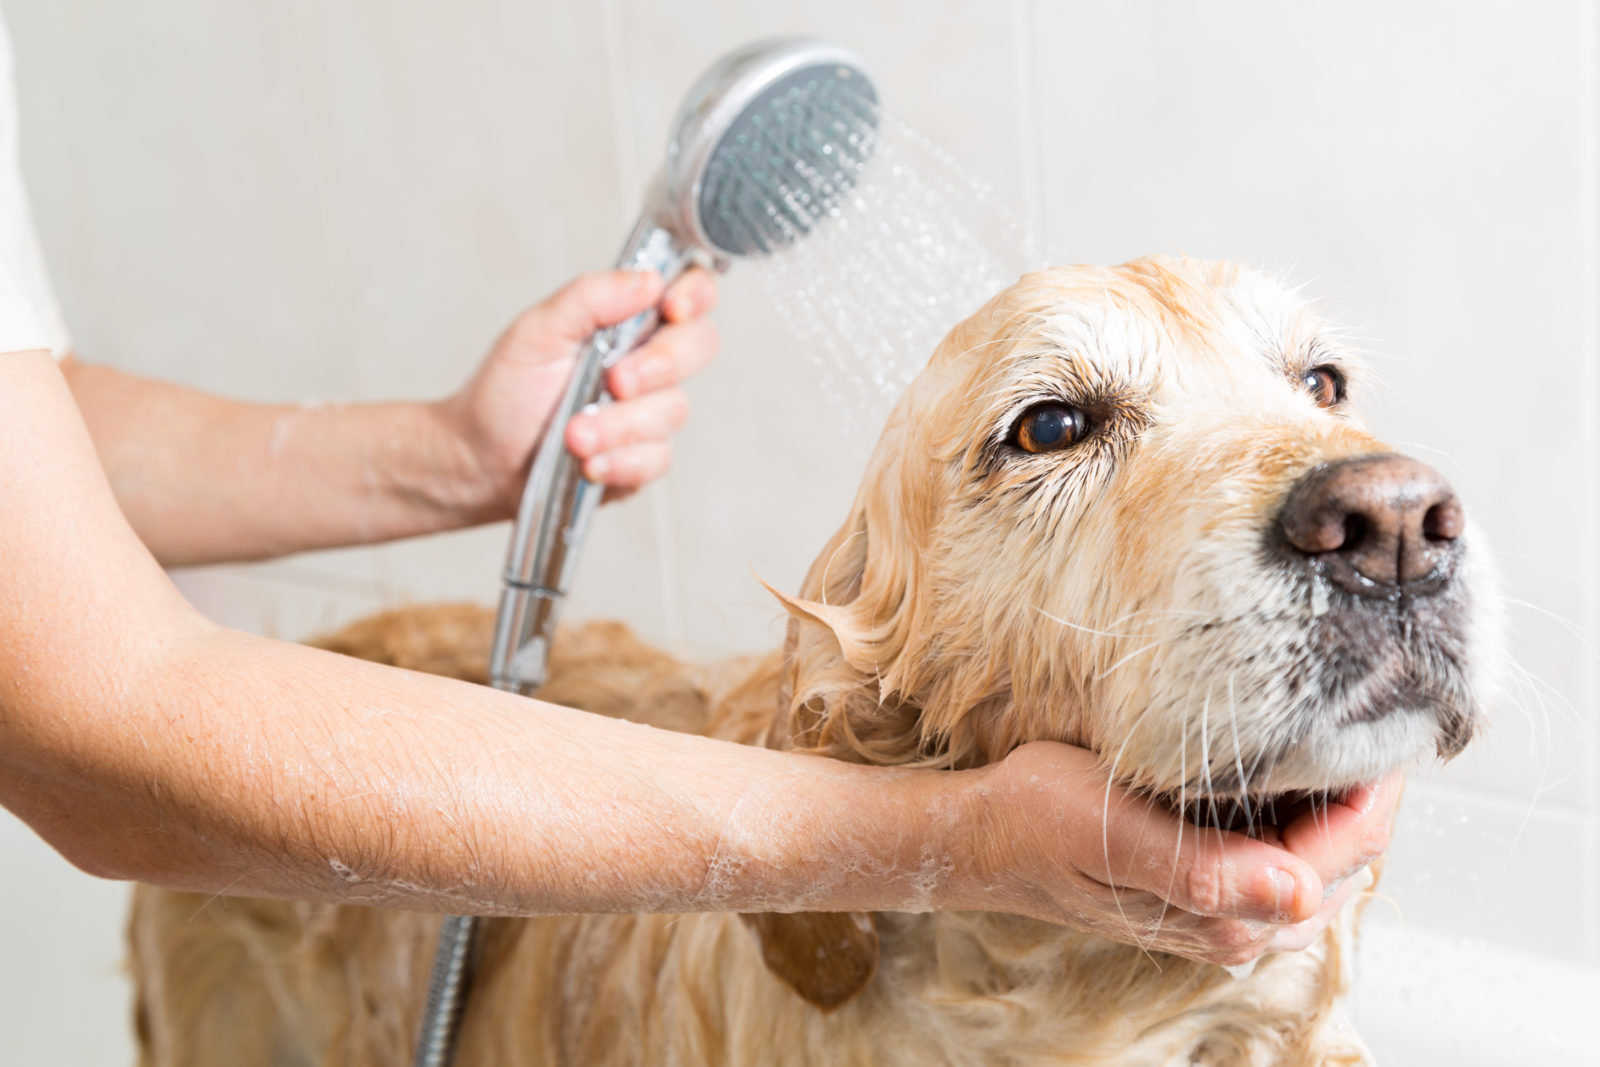 West Palm Beach dog grooming services